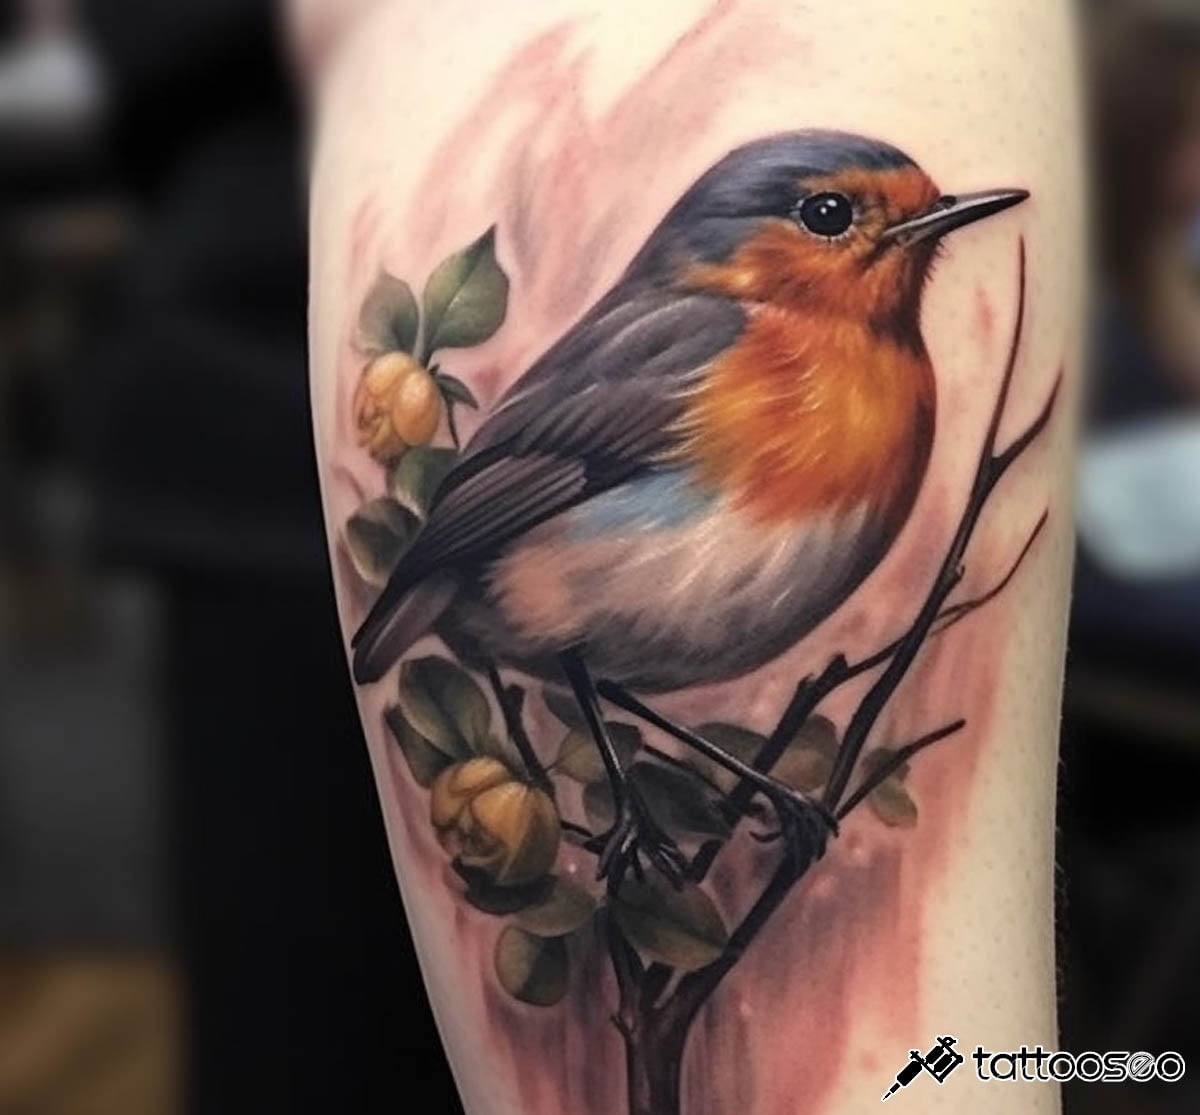 Robin tattoo meaning